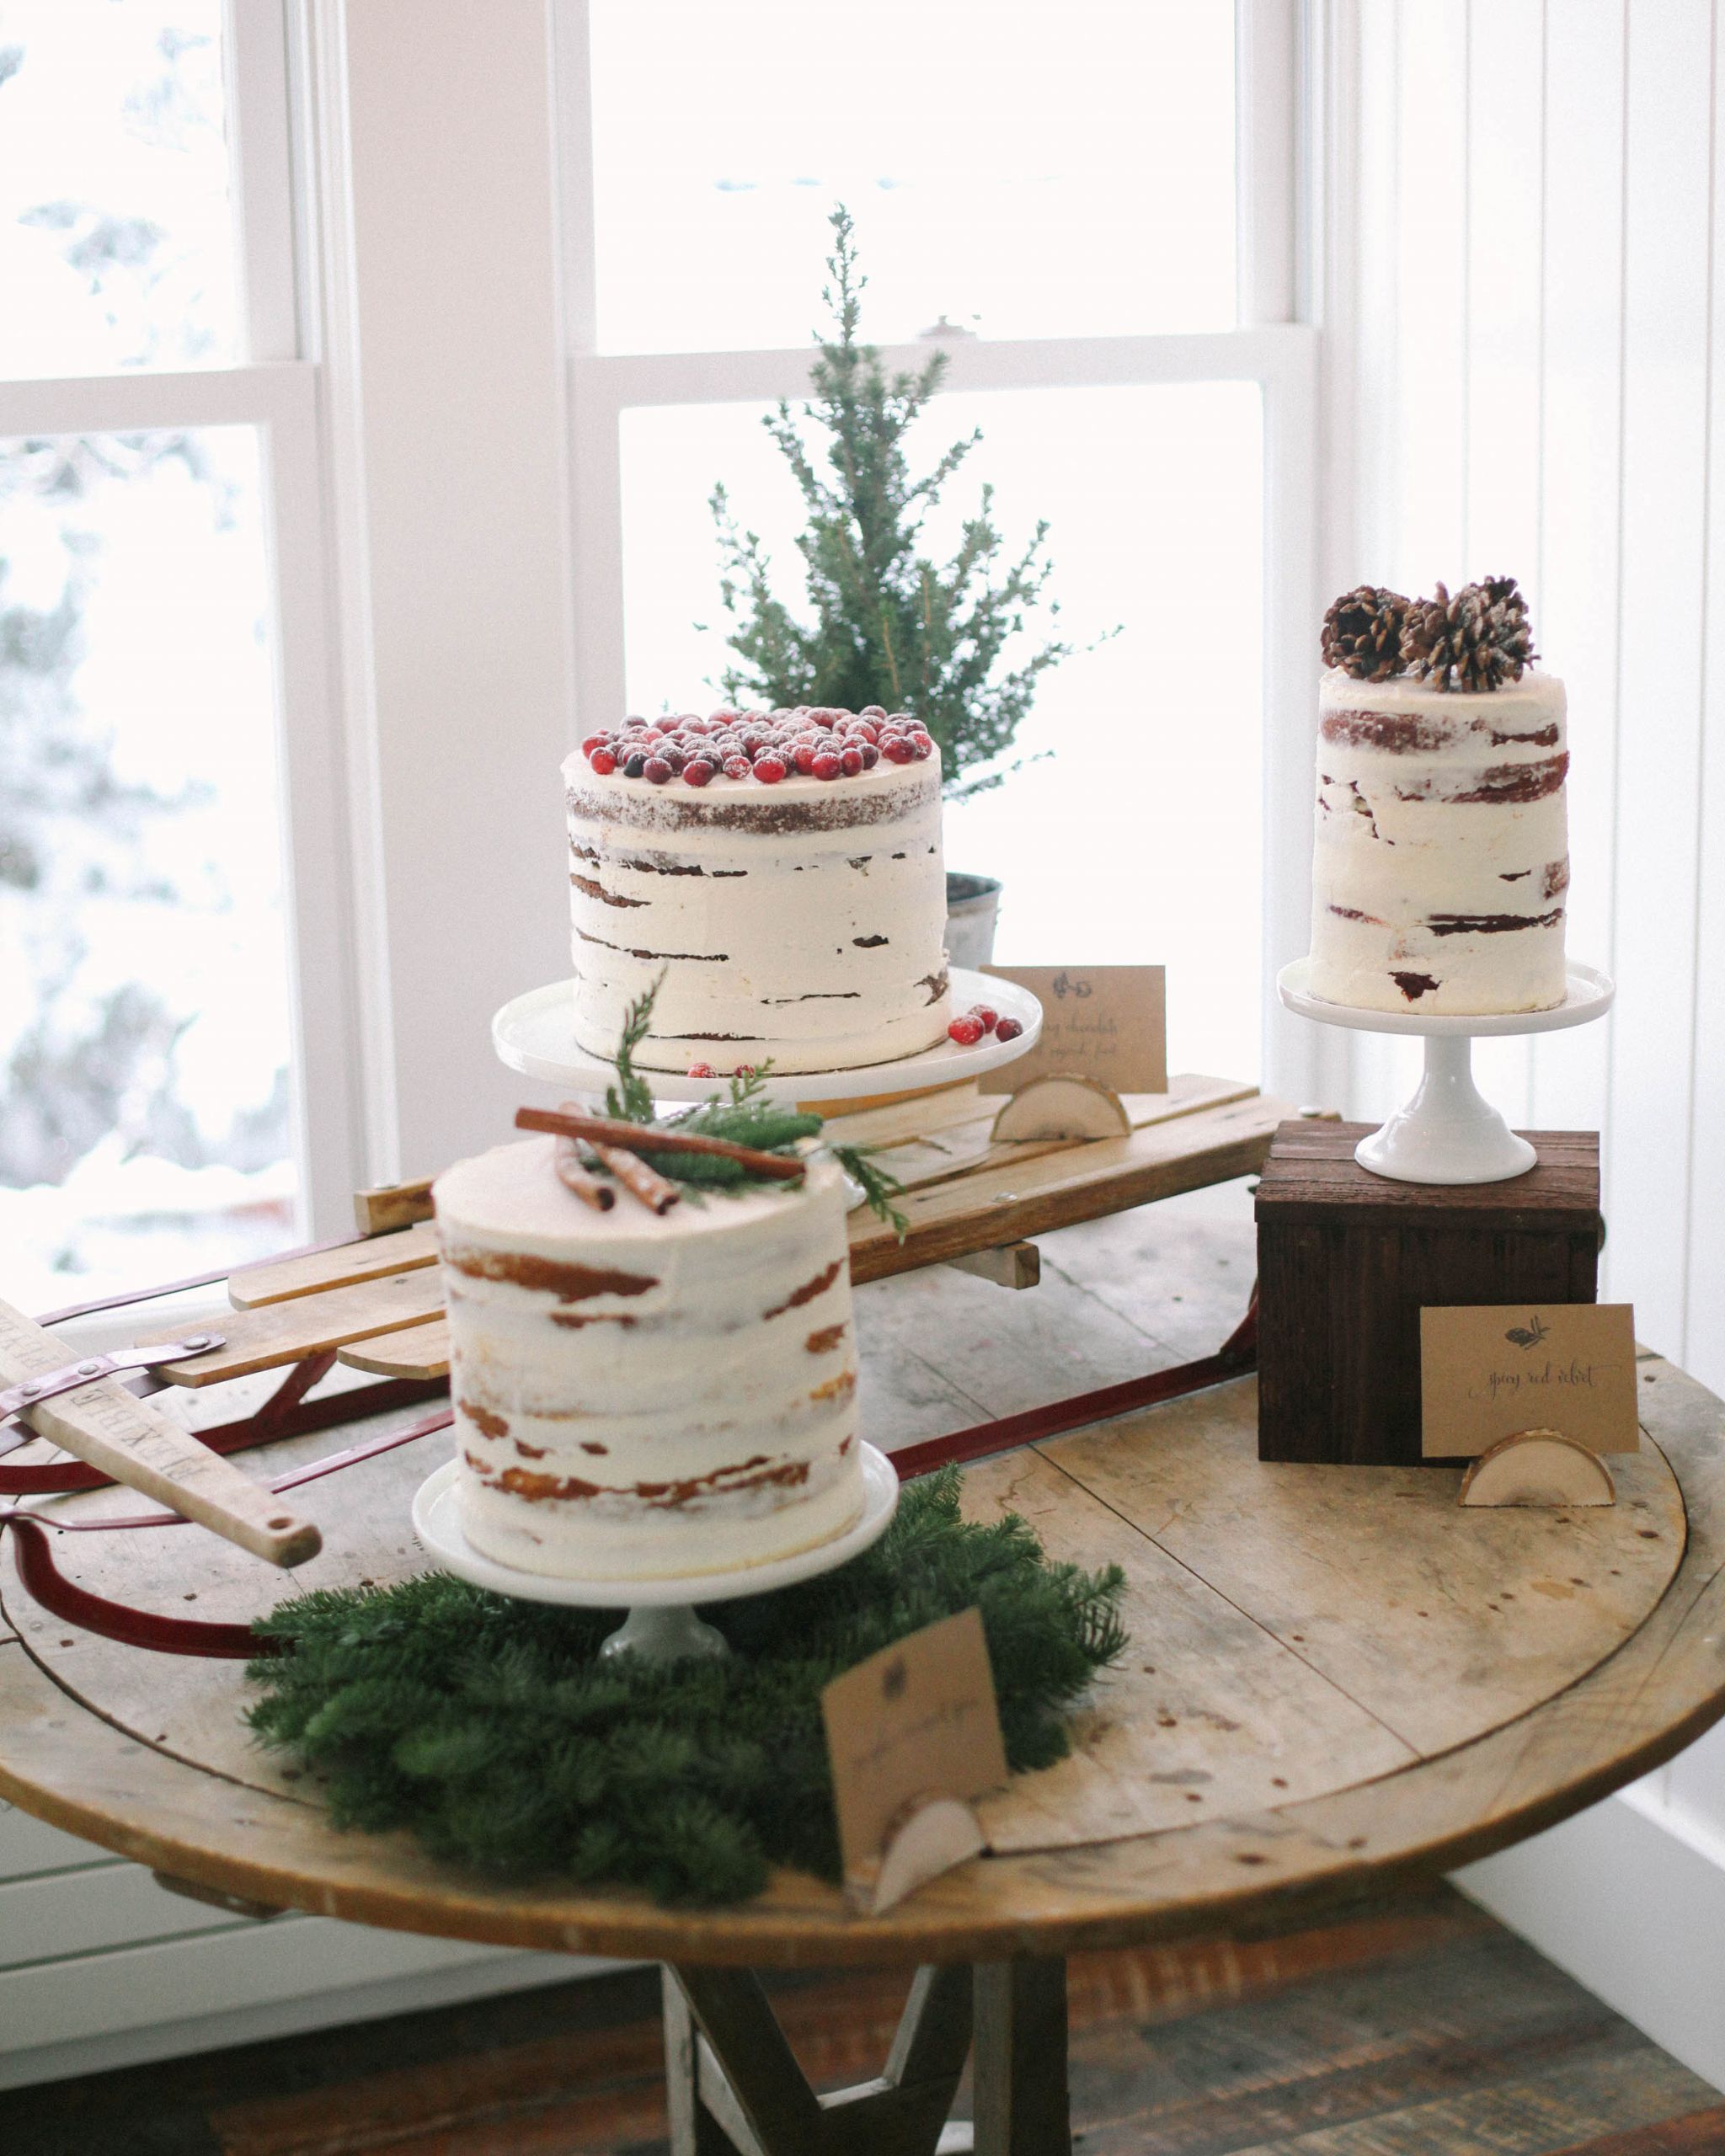 Wedding Shower Cake Ideas
 20 Tips for Throwing the Ultimate Winter Bridal Shower